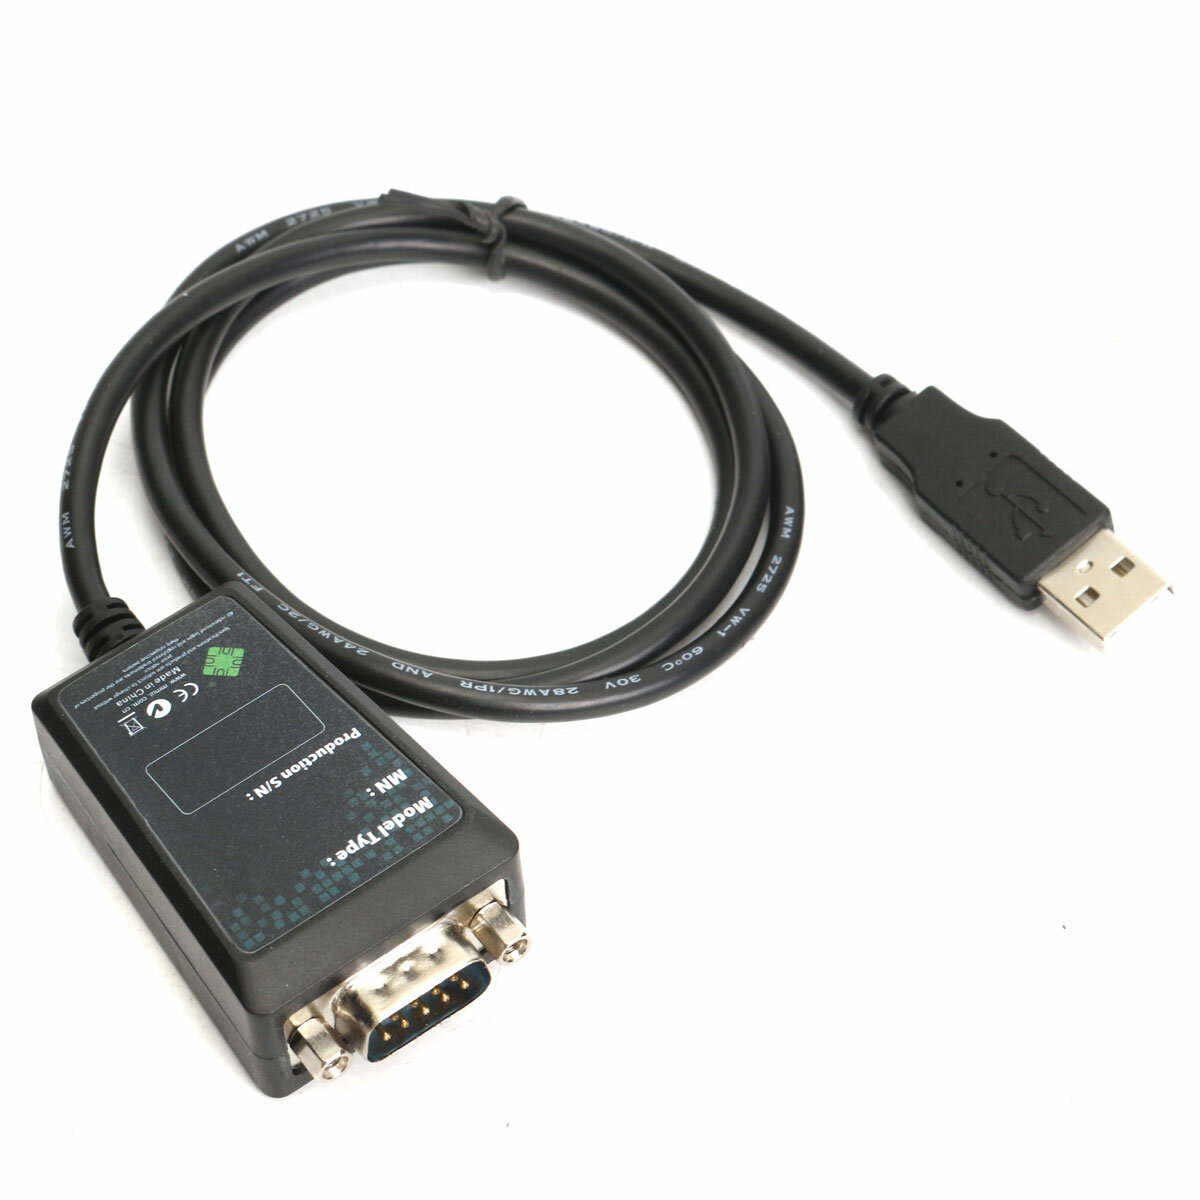 

LEORY RS232 DB9 (FTDI Chipset) 232A Set Kit Profeesional USB to Serial Port Converter Cable Connector Wire